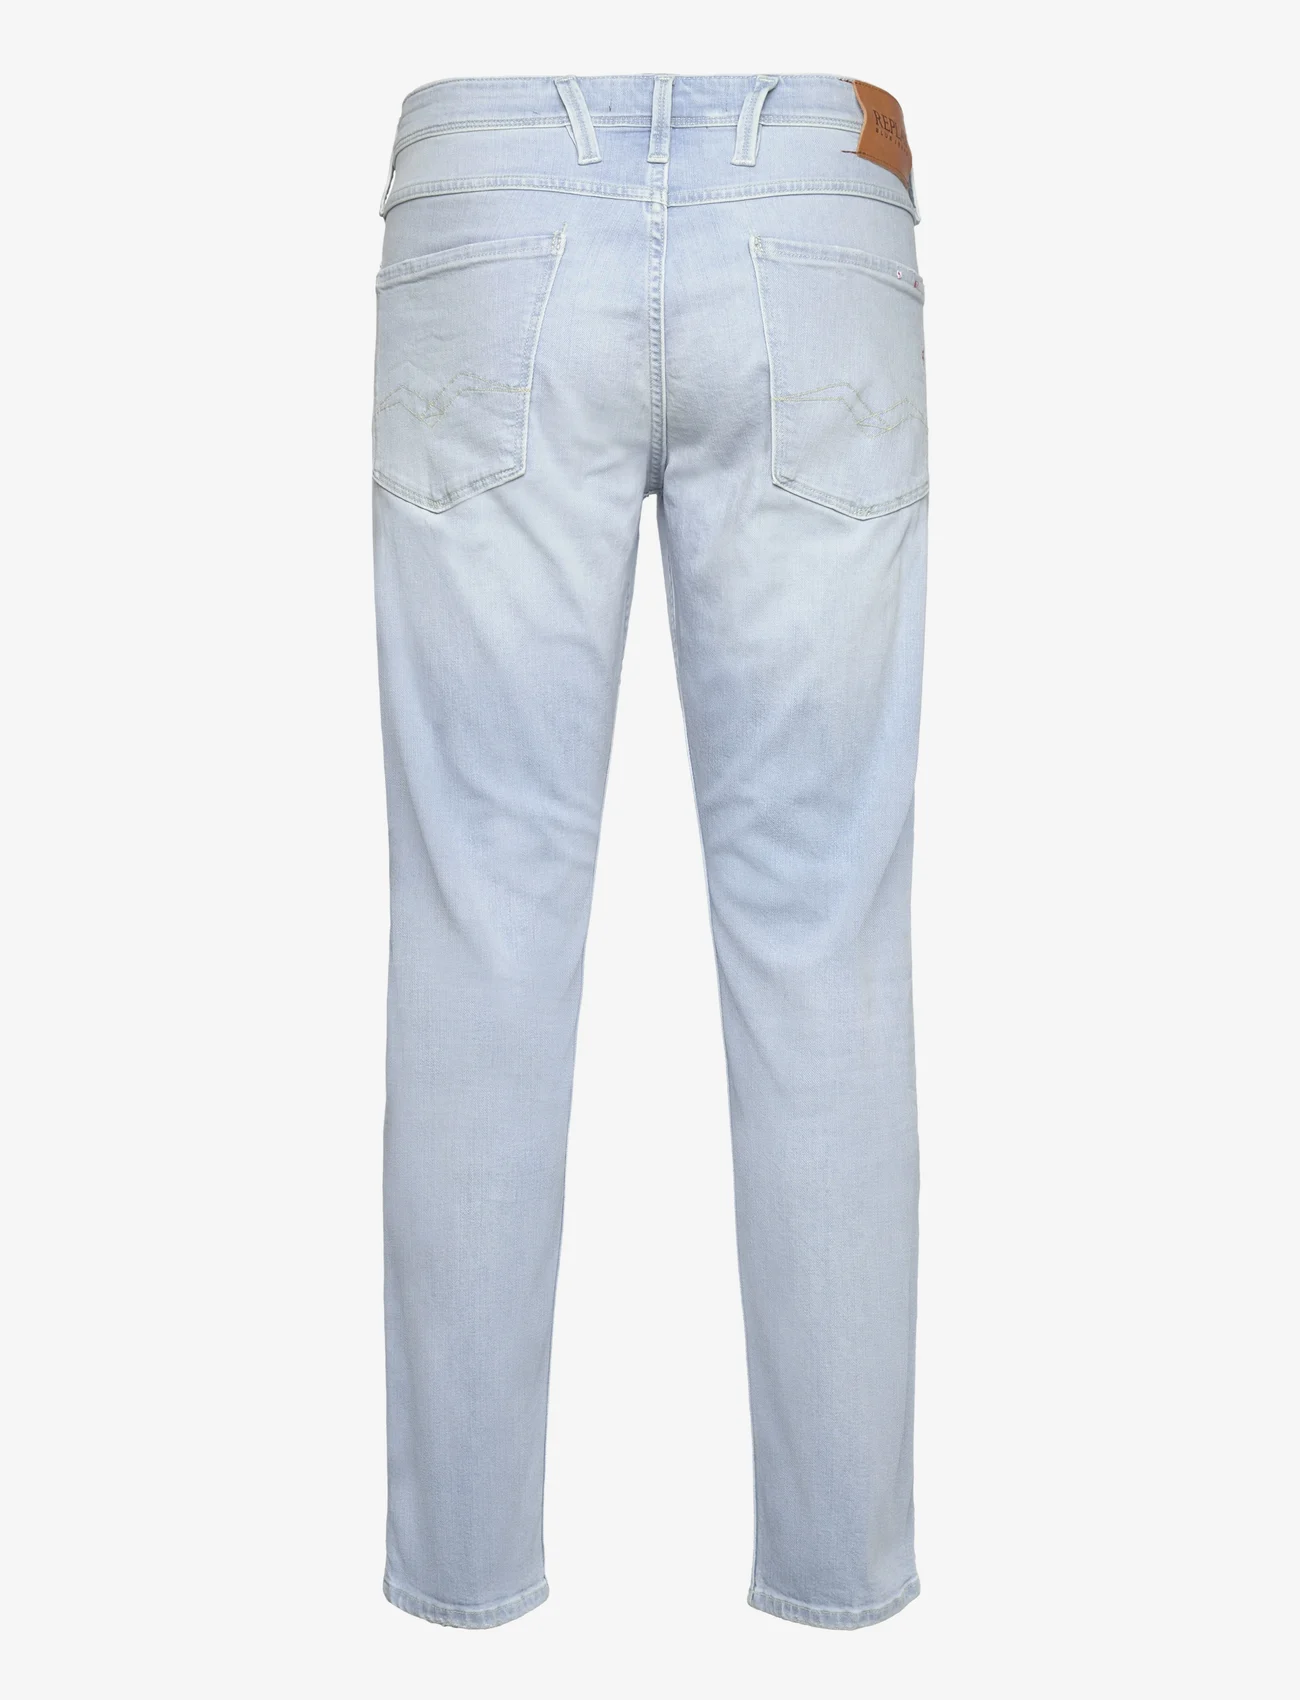 Replay - ANBASS Trousers SLIM 573 ONLINE - slim jeans - blue - 1